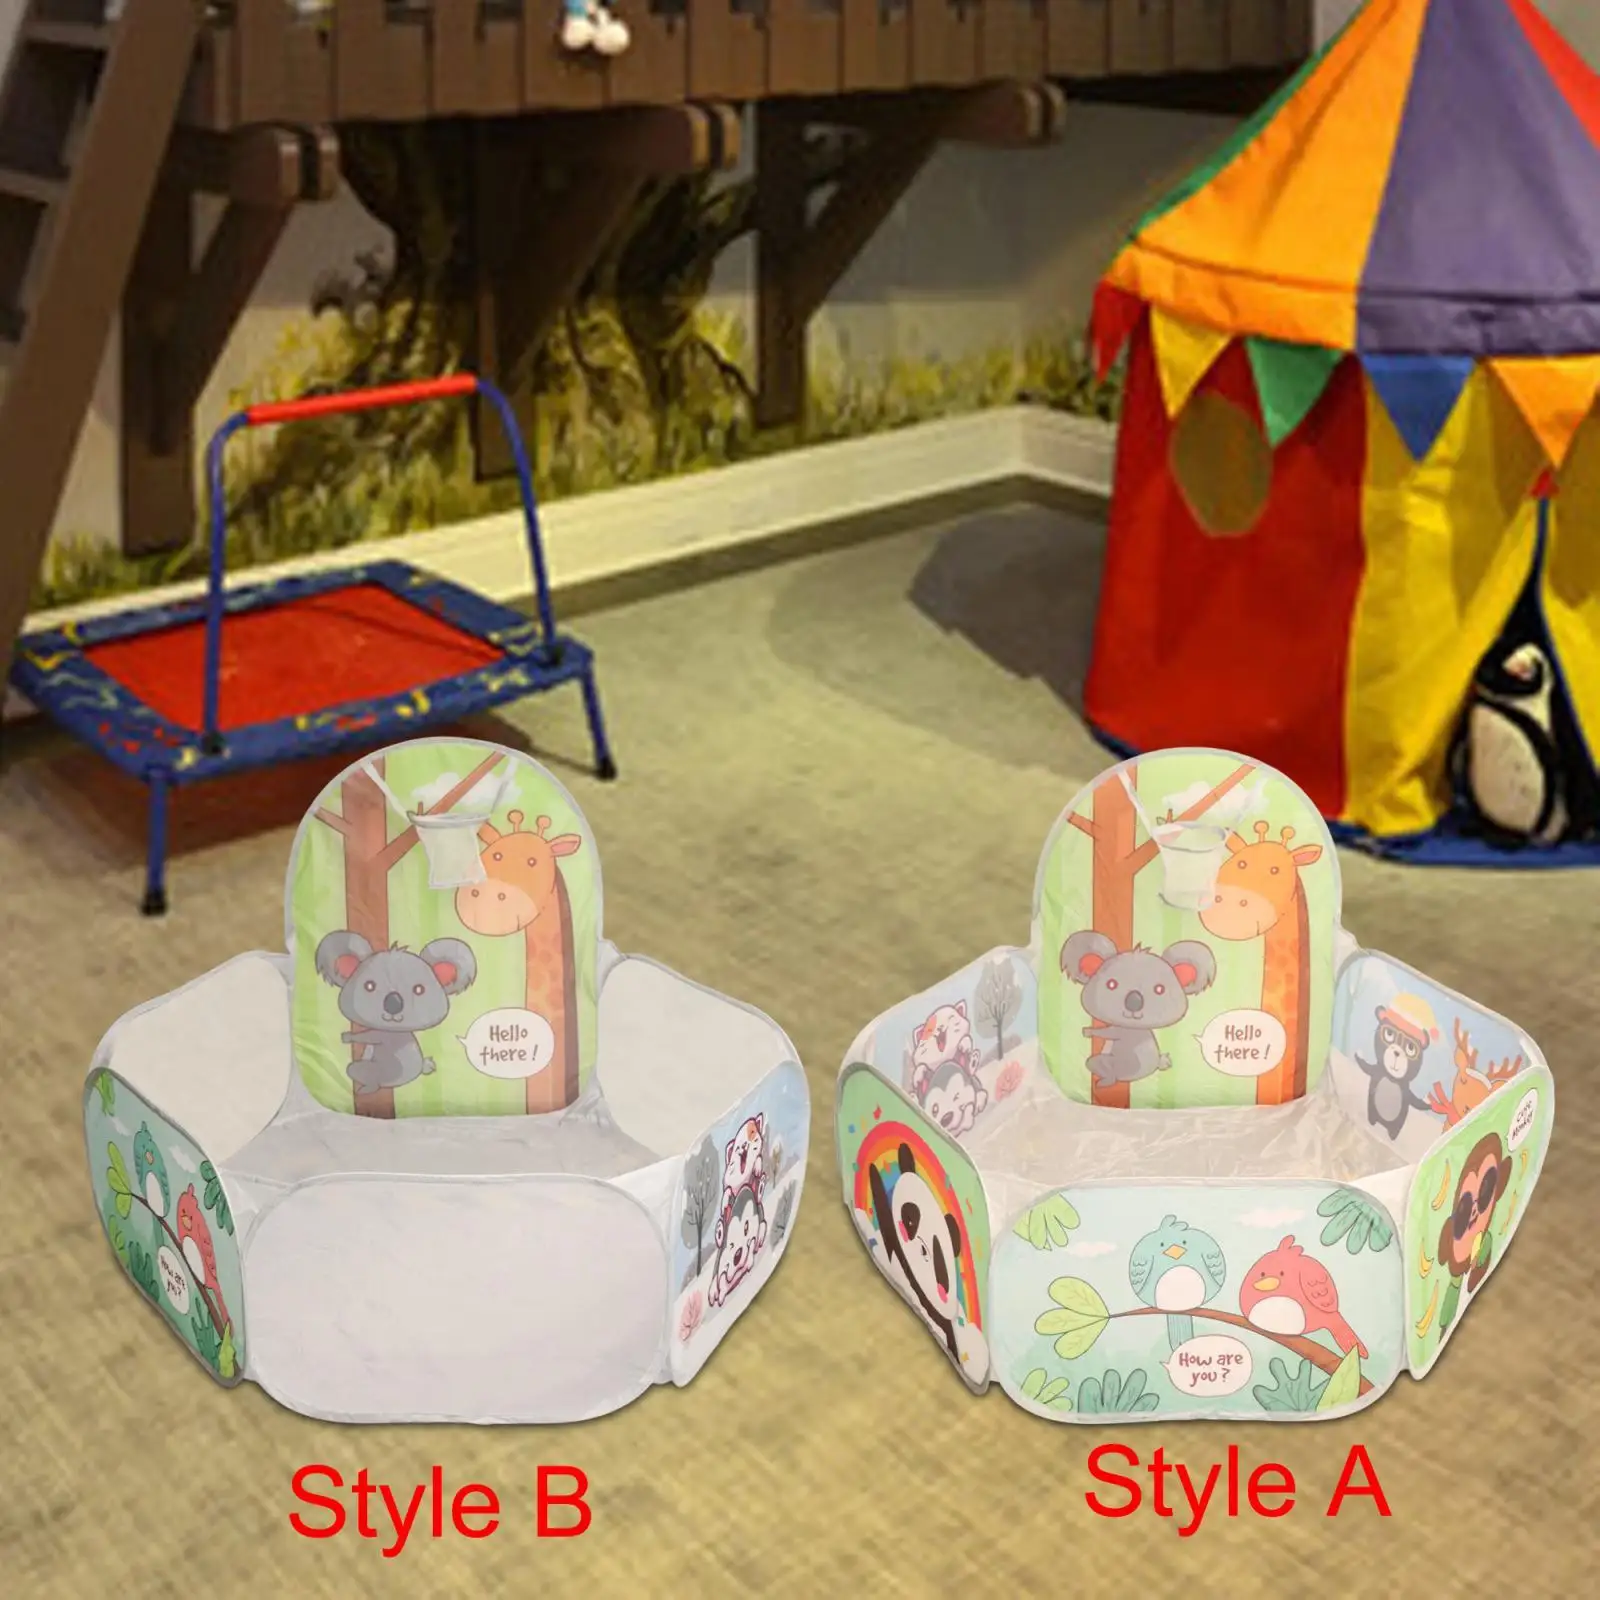 Play Tent Outdoor Indoor Play Colorful Foldable Easy Installation Park